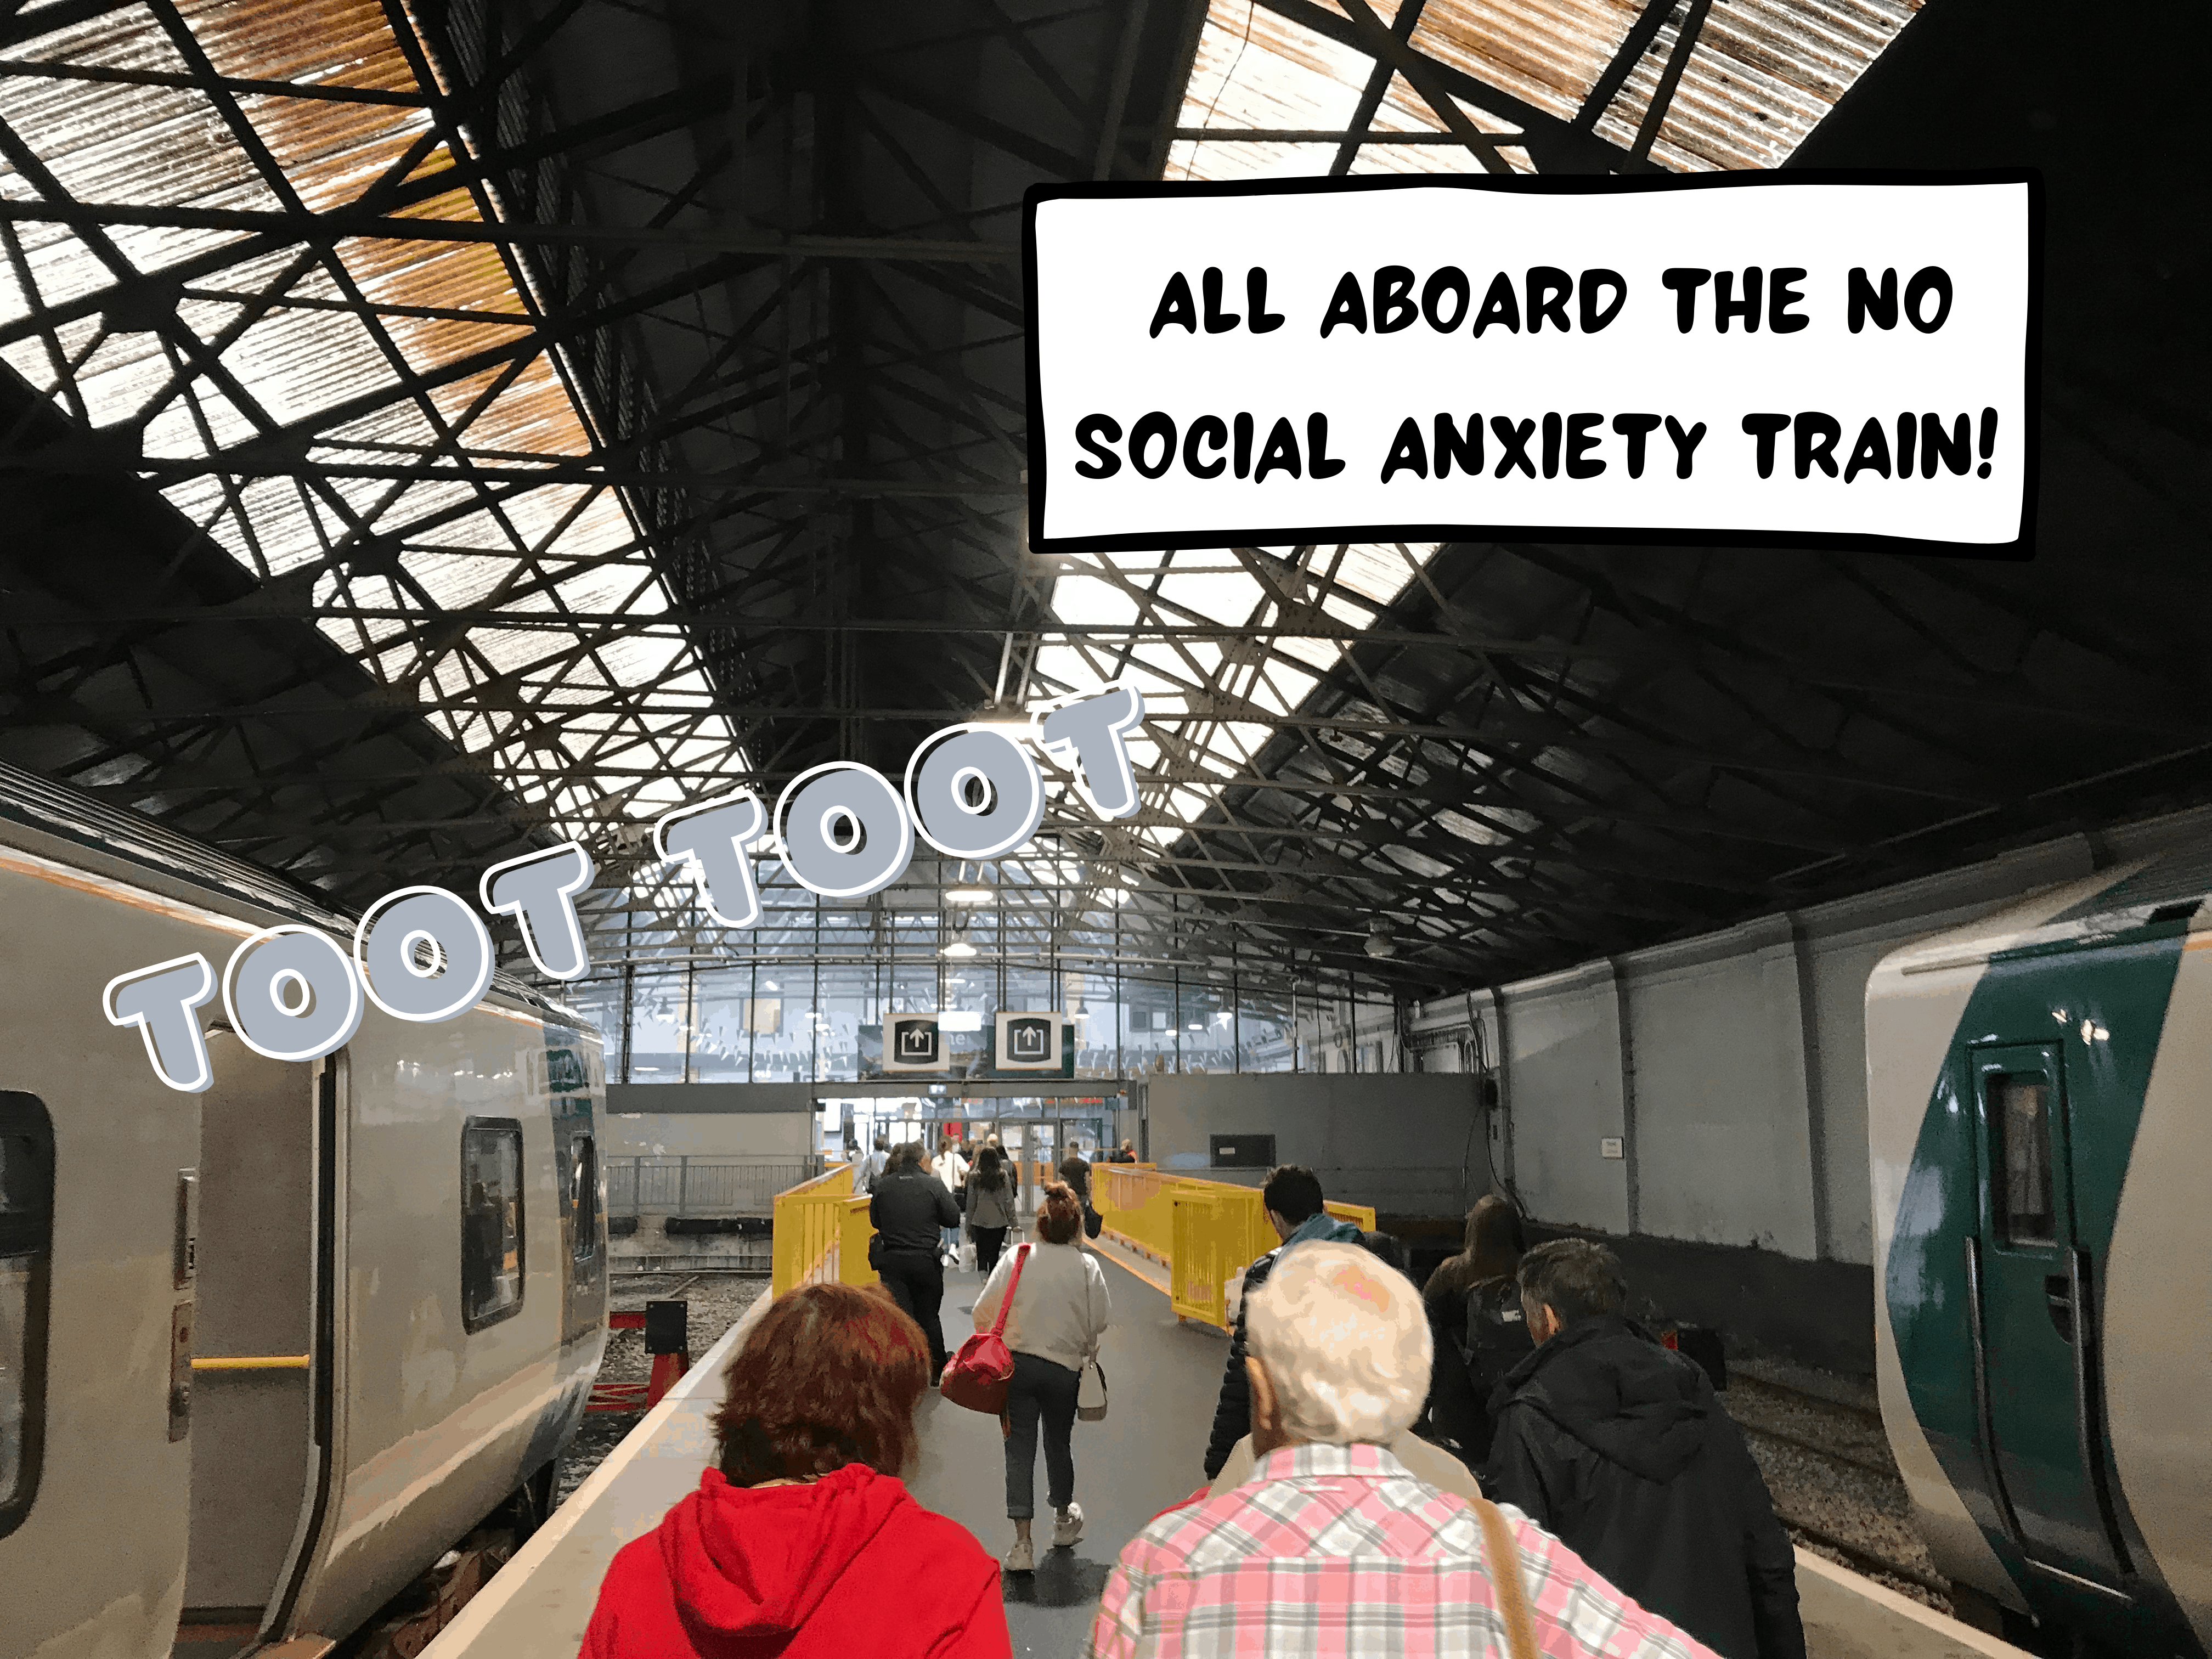 At the Limerick Colbert Irish Rail train station in Limerick, Republic of Ireland, people are walking on a platform headed for the exit. Trains resting on the tracks are on both sides of the platform. A comic text box says, "All about the no social anxiety train!" Words nearby a train say "TOOT TOOT". A large roof with window panes is covering the scene.